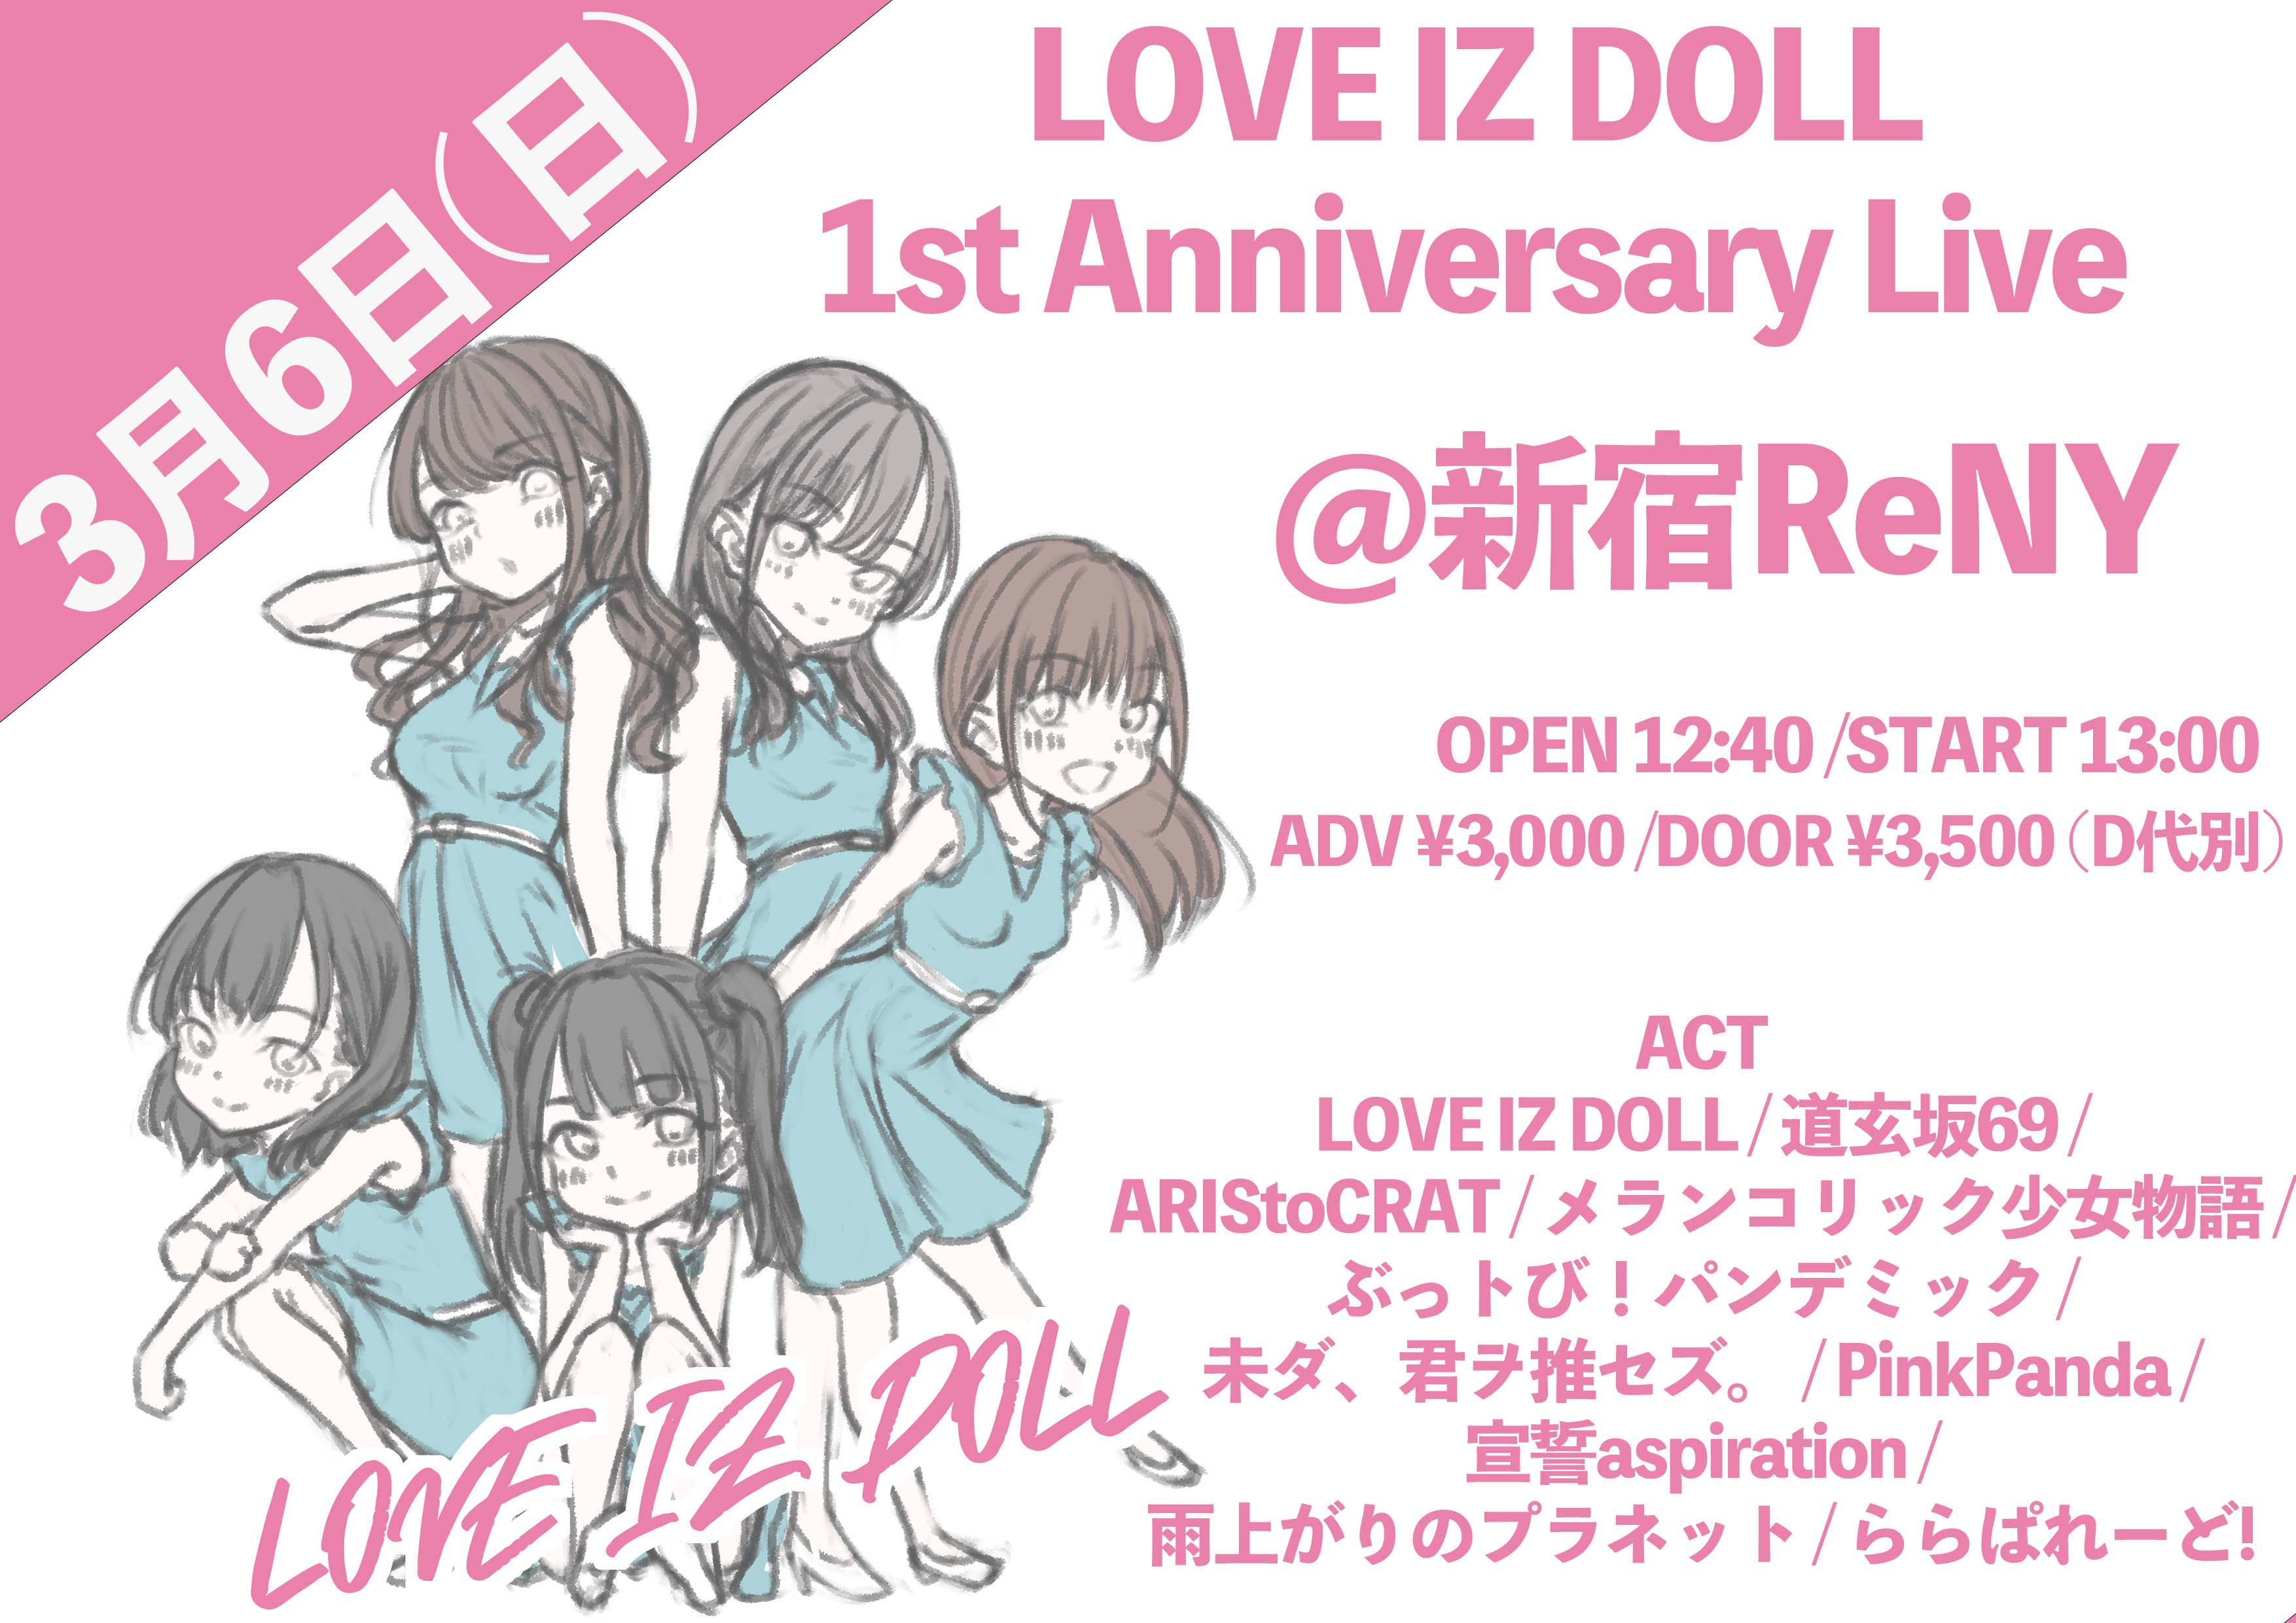 LOVE IZ DOLL 1st Anniversary Live supported by KYUN2 Fes